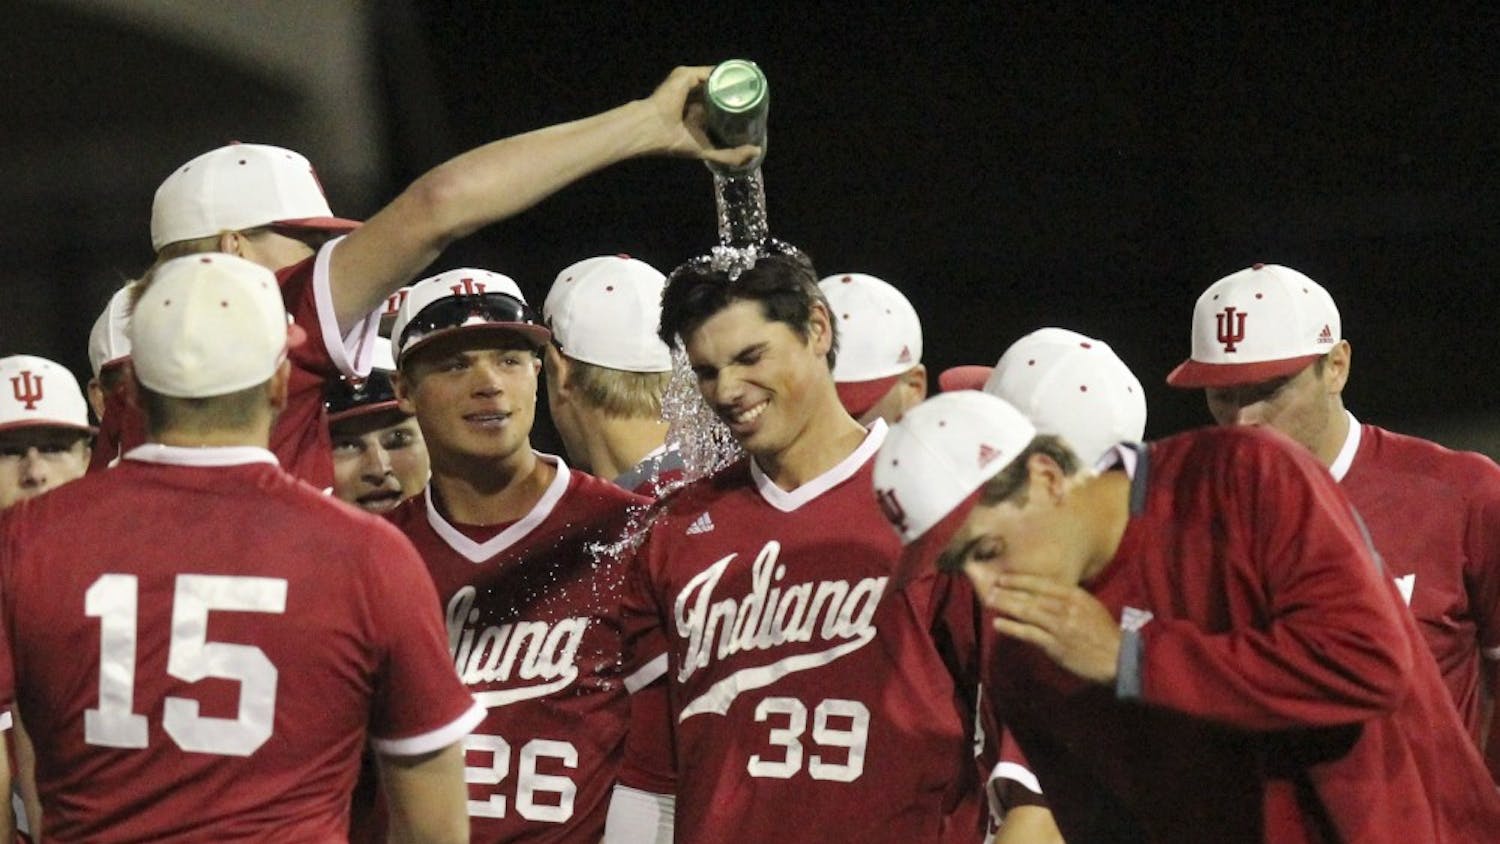 Teammates pour water over junior outfielder Craig Dedelow's head after beating Northwestern in the second game of a doubleheader on Friday night. An error by the Northwestern first baseman allowed Dedelow to get to first and the Hoosiers to win 4-3.